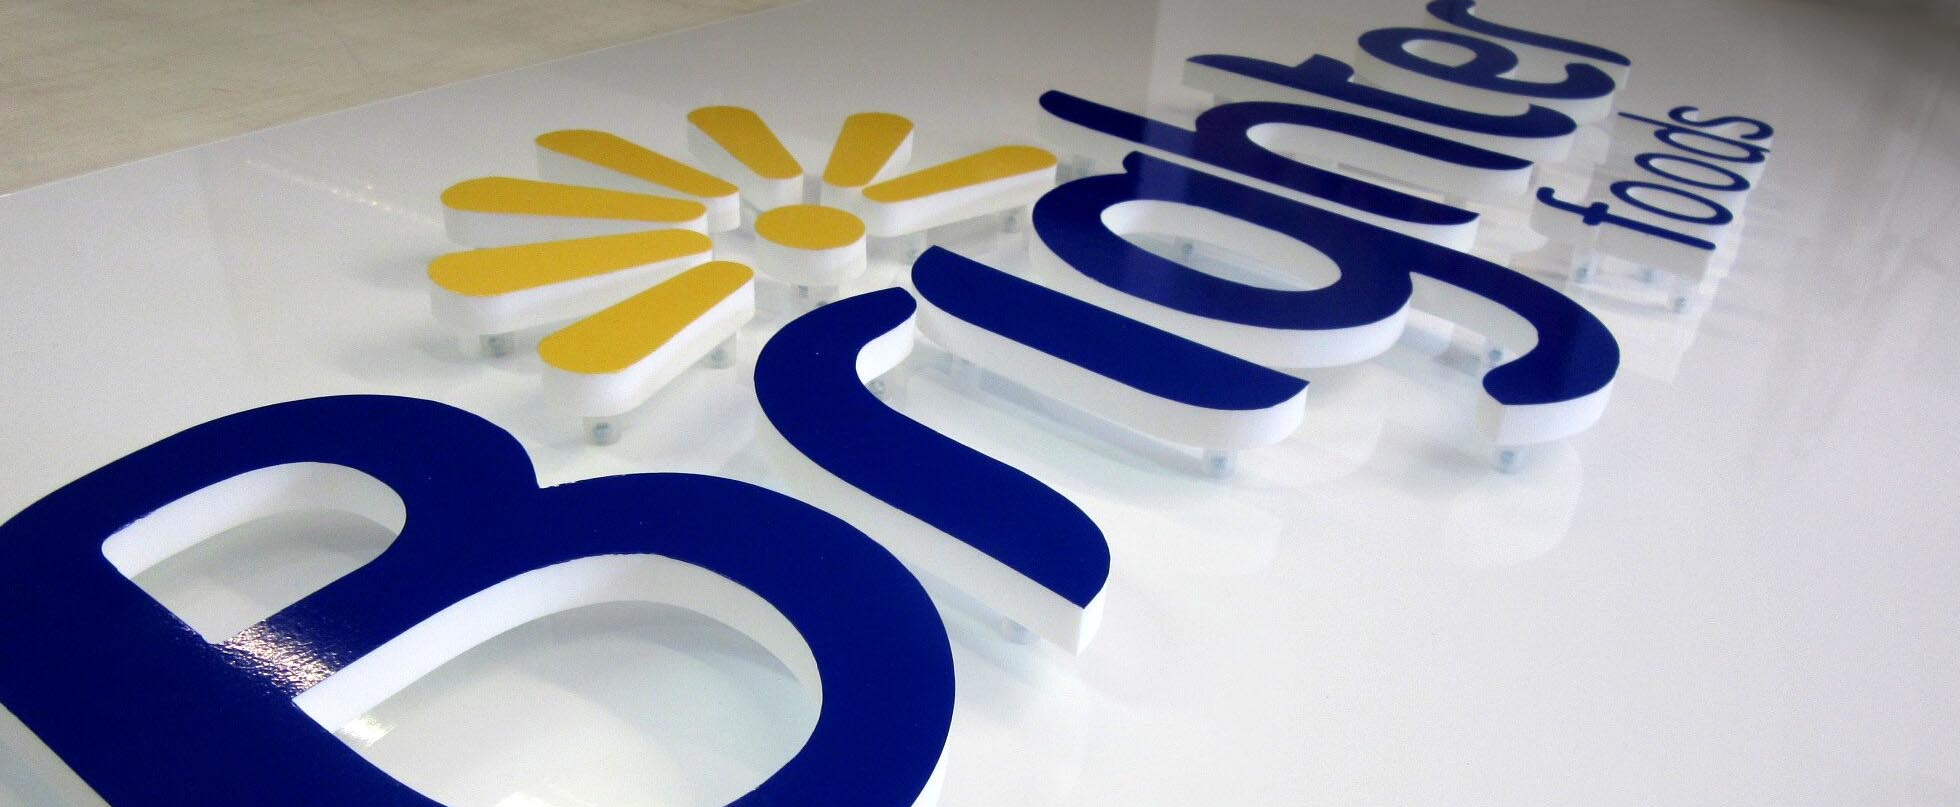 Acrylic Flat cut letters and Logos